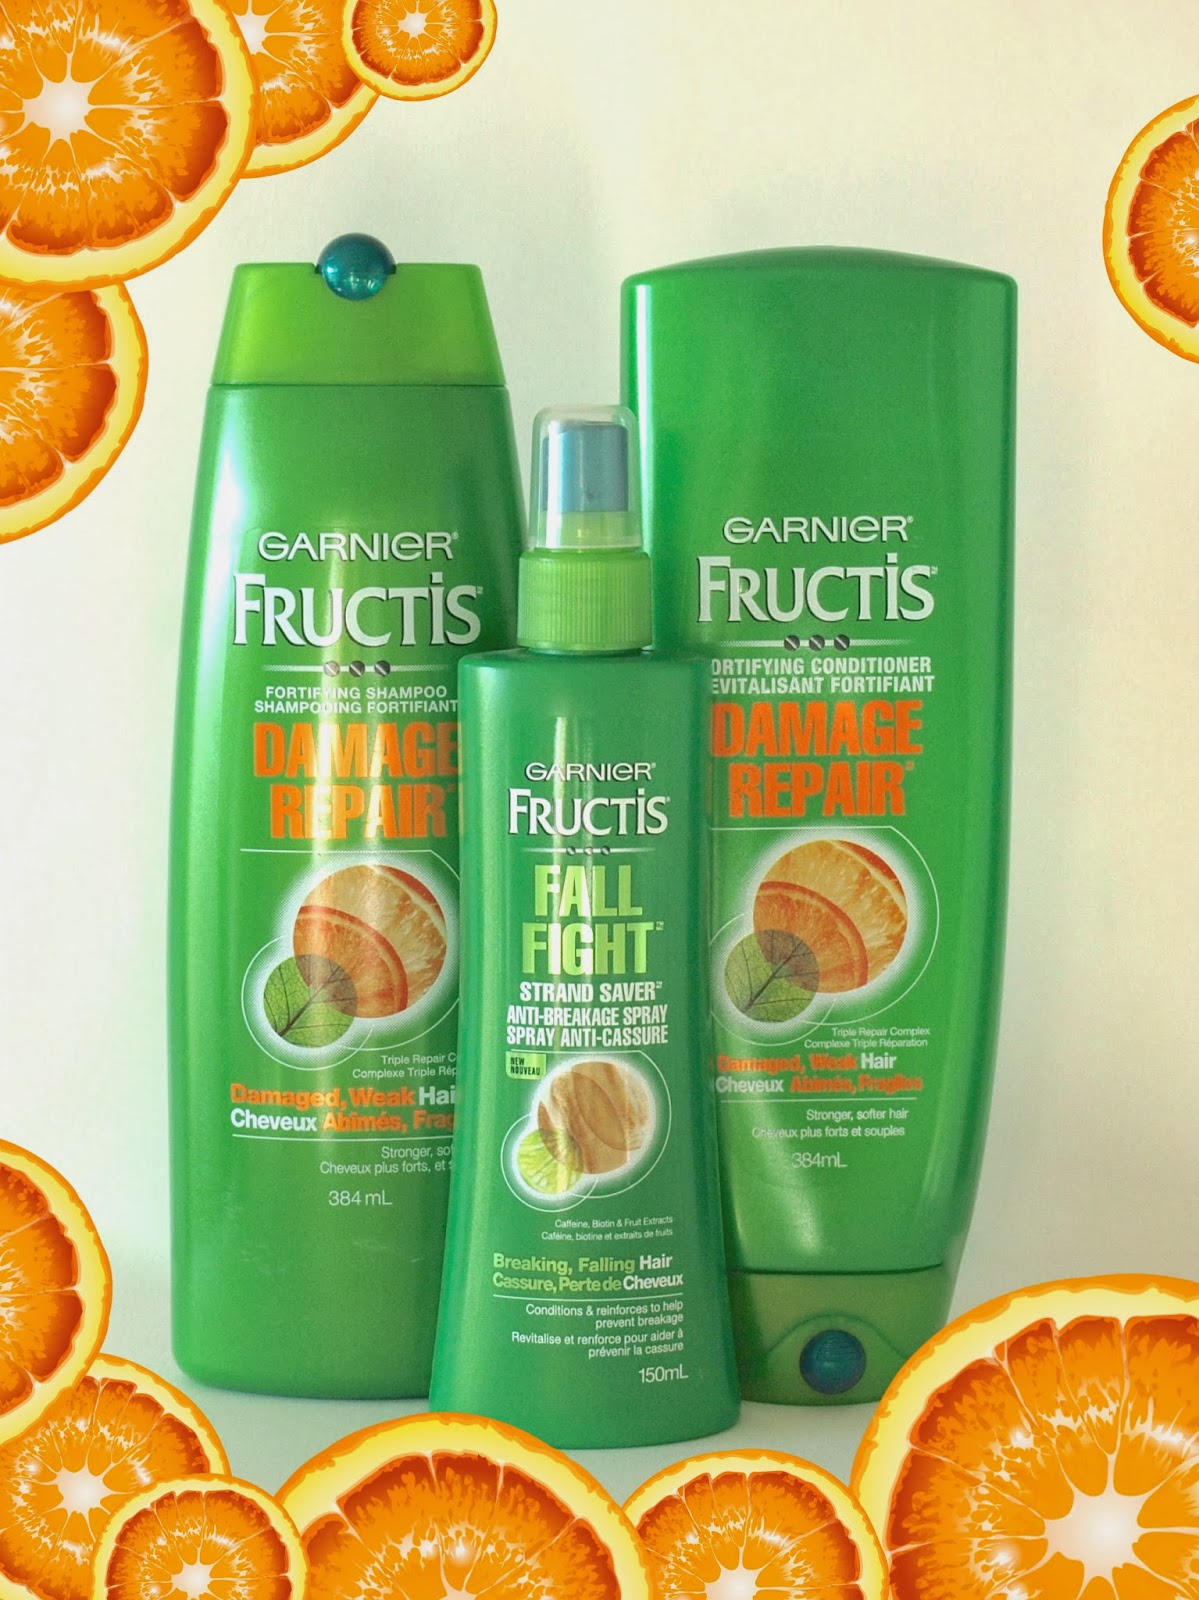 Garnier Fructis Damage Repair Shampoo & Conditioner & Fall Strand Saver Anti-Breakage Spray: Review | The Happy Sloths: Beauty, Makeup, and Skincare Blog Reviews and Swatches